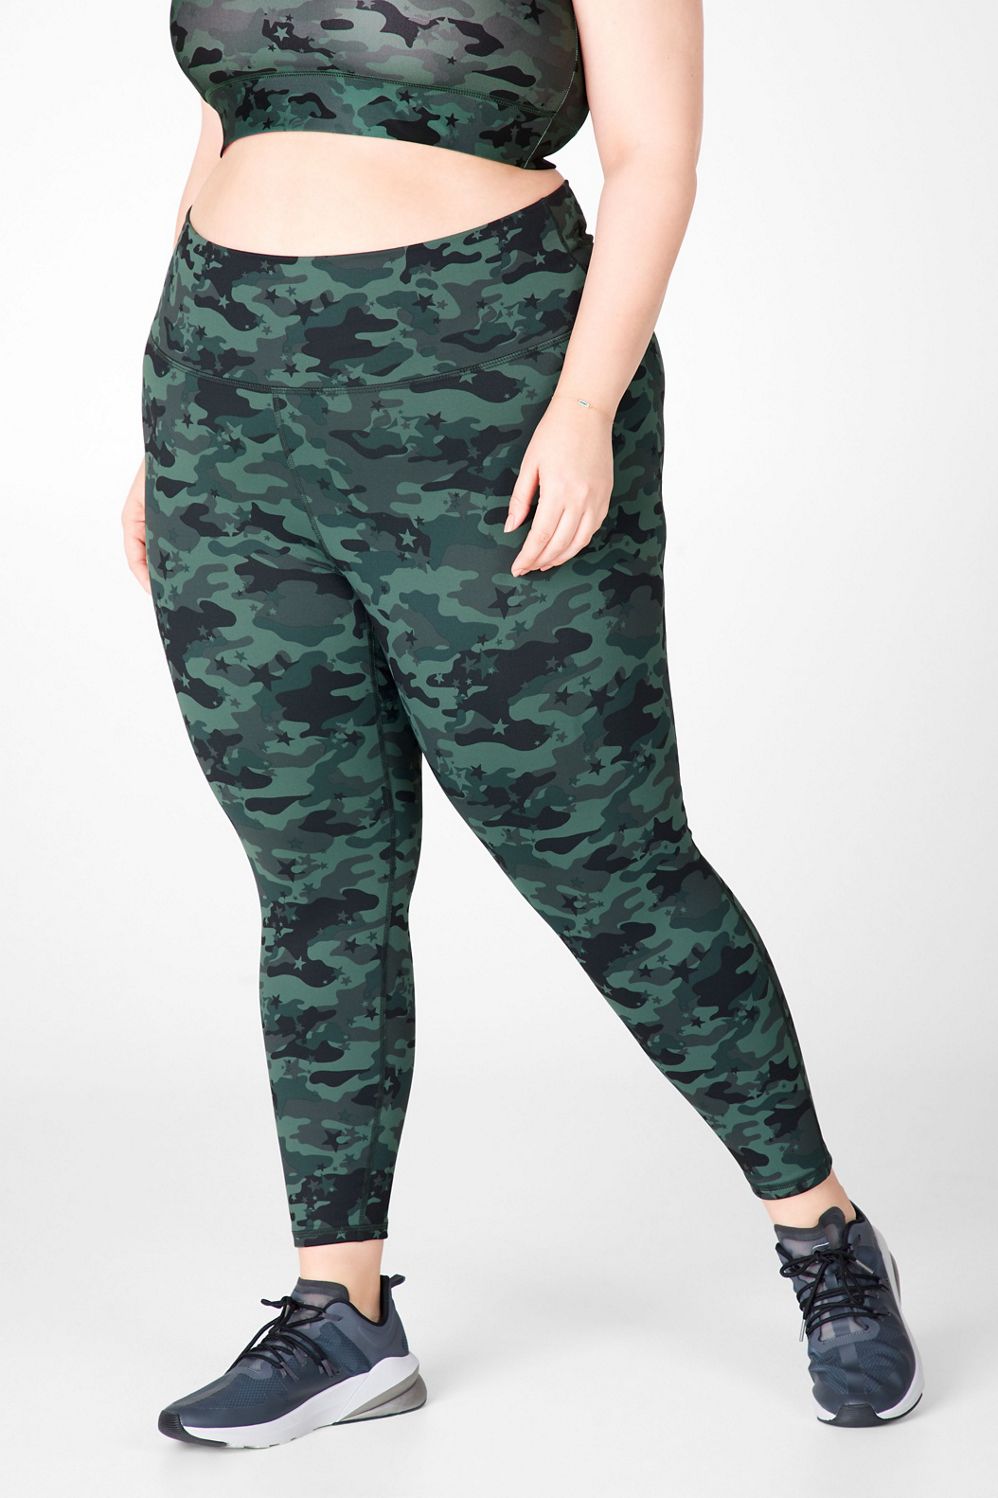 New Lg. Sage Green Camo Leggings - $15 (76% Off Retail) - From